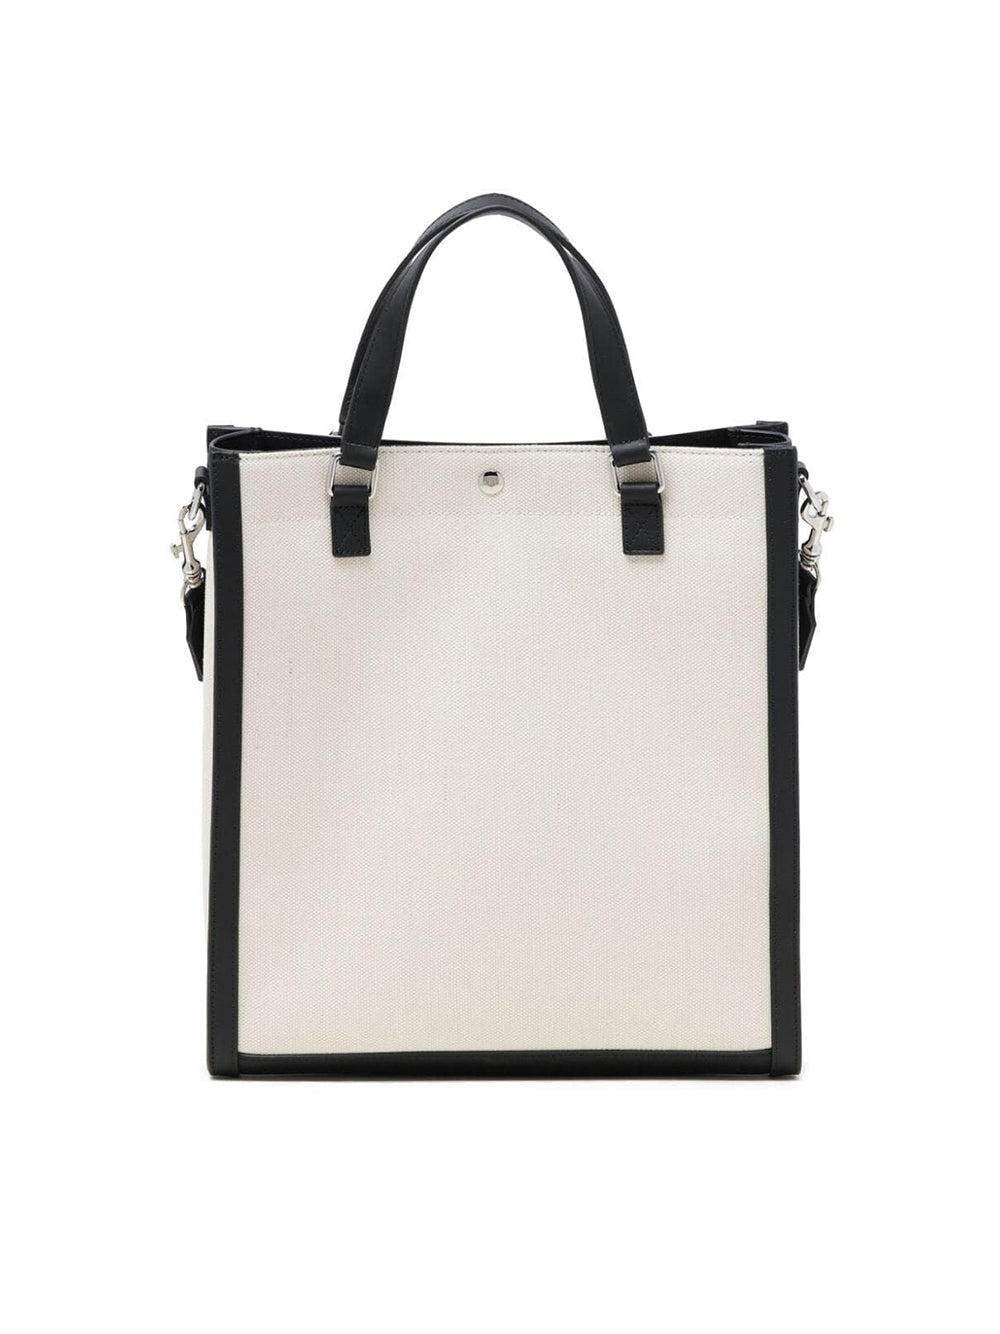 Black and White Camille Bag